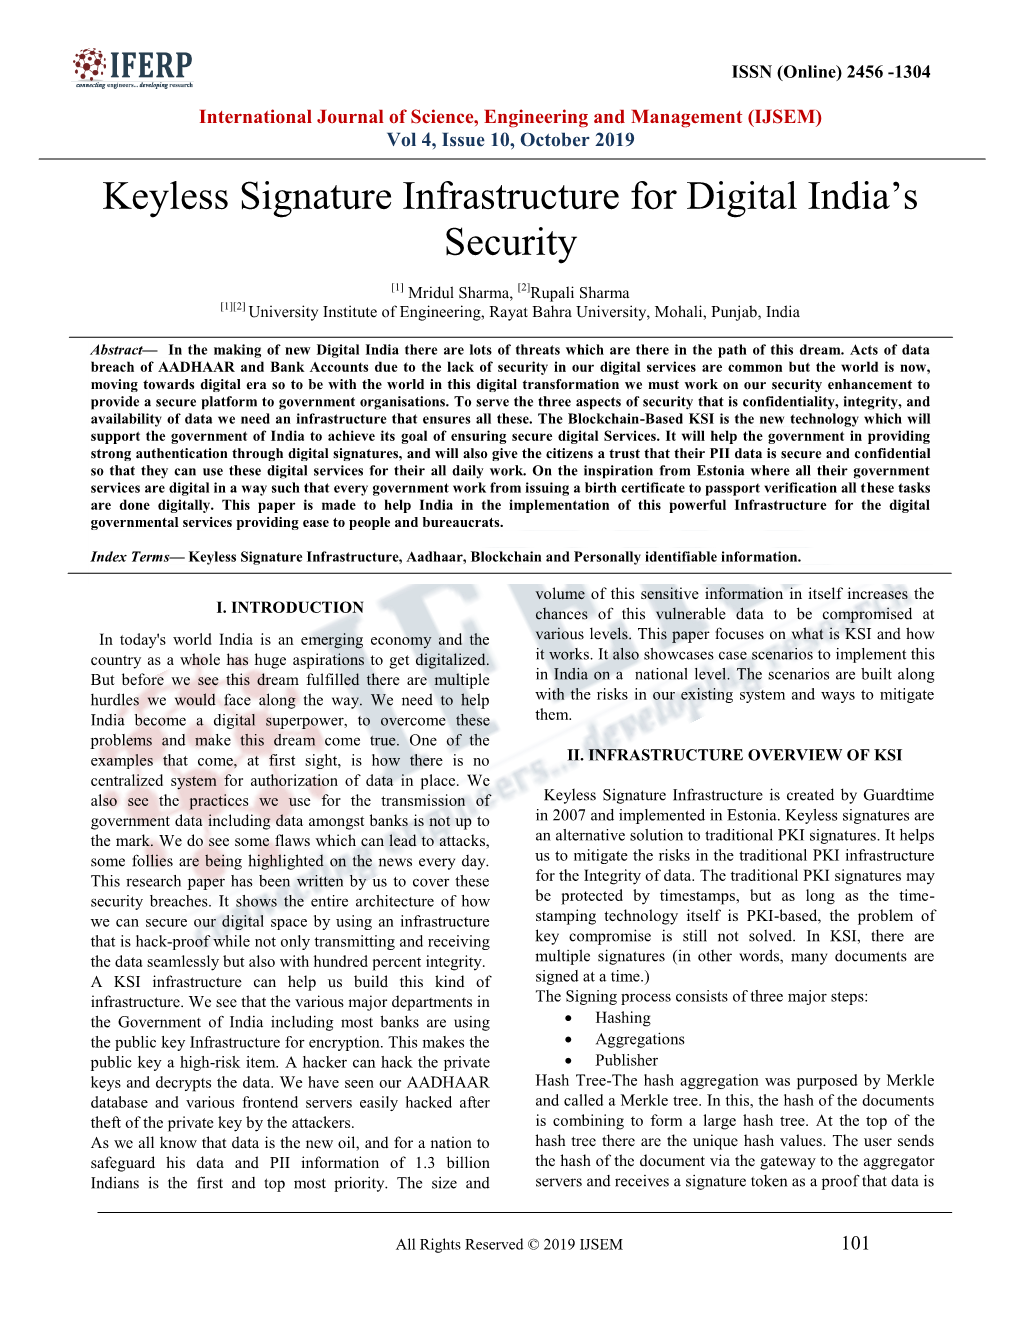 Keyless Signature Infrastructure for Digital India's Security